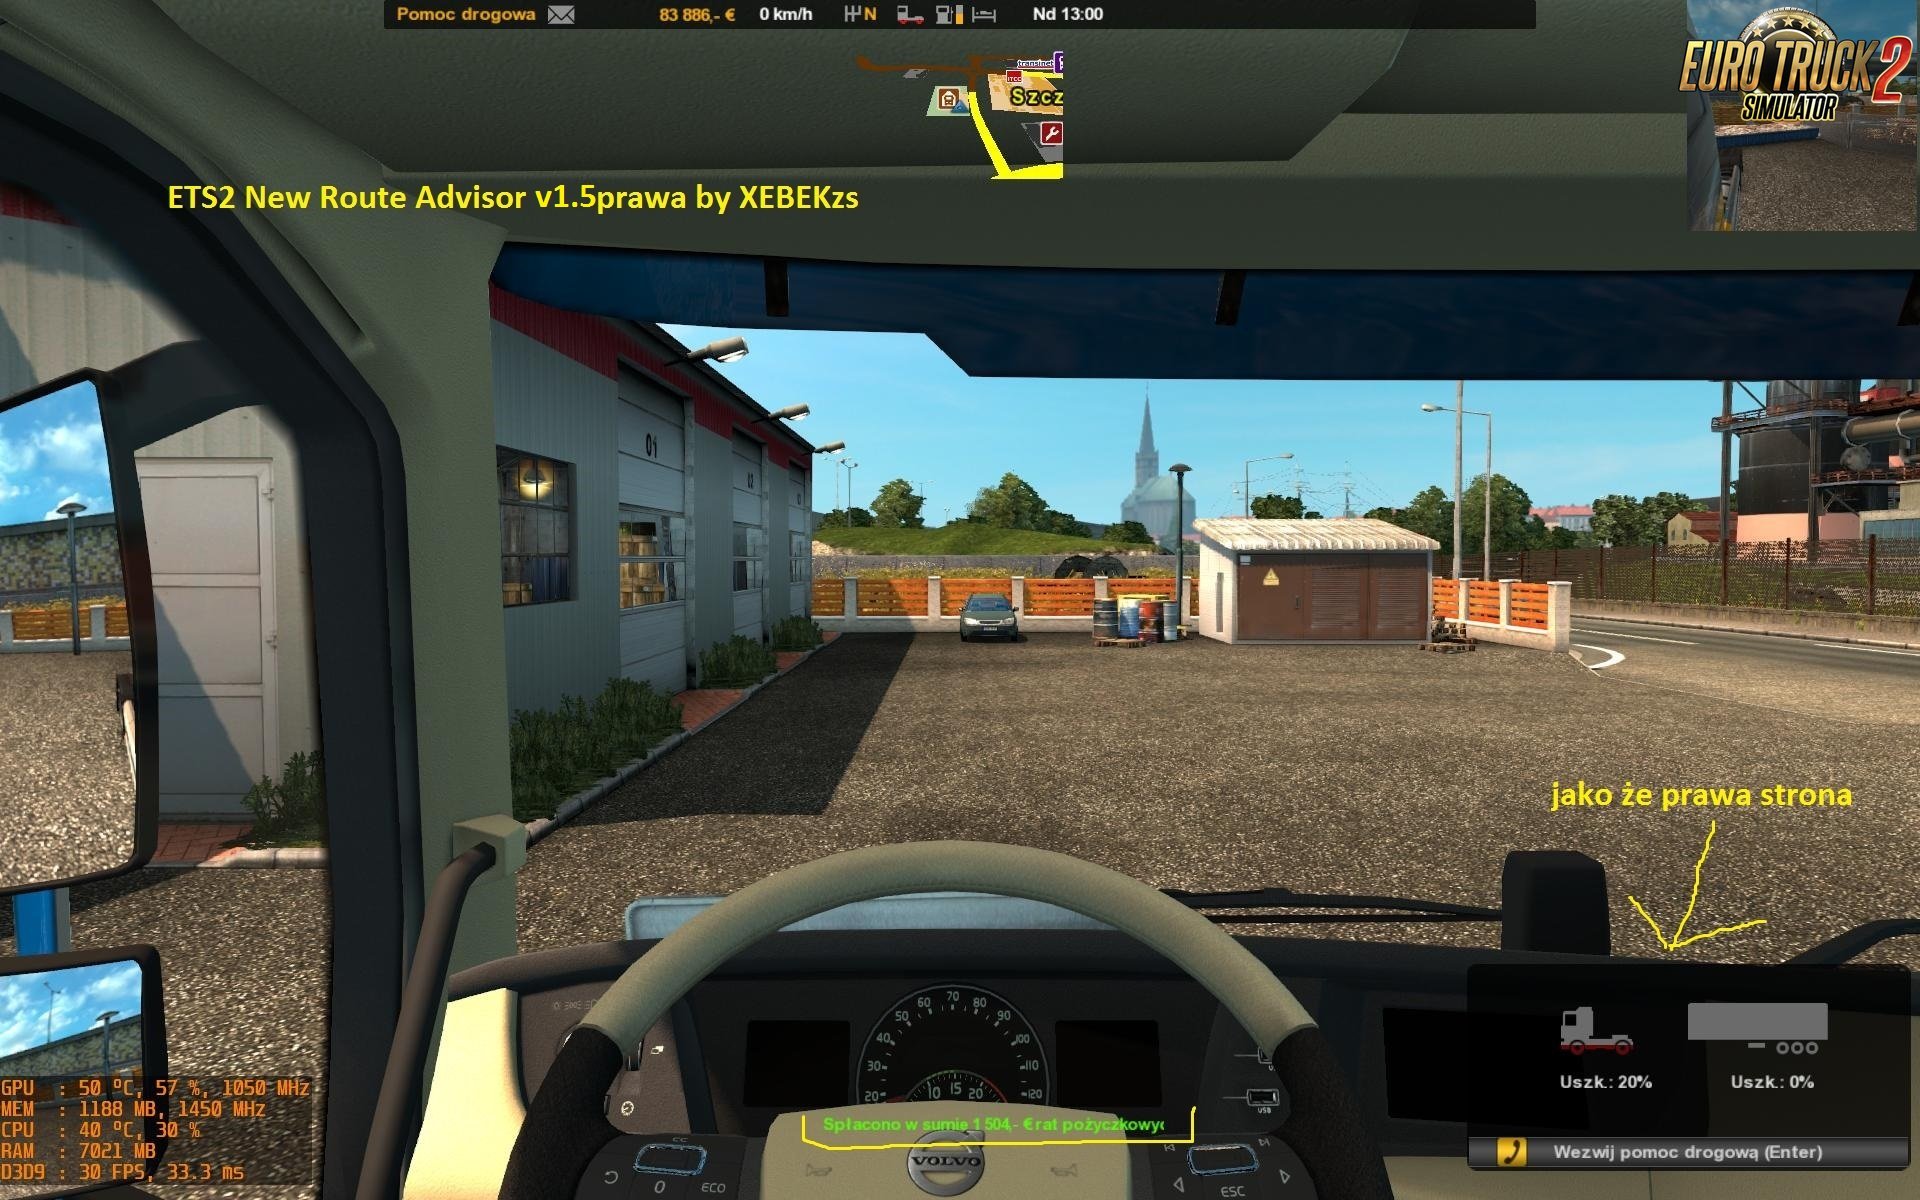 Ets2 and Ats New Route Advisor v1.5 (three versions)by XEBEKzs